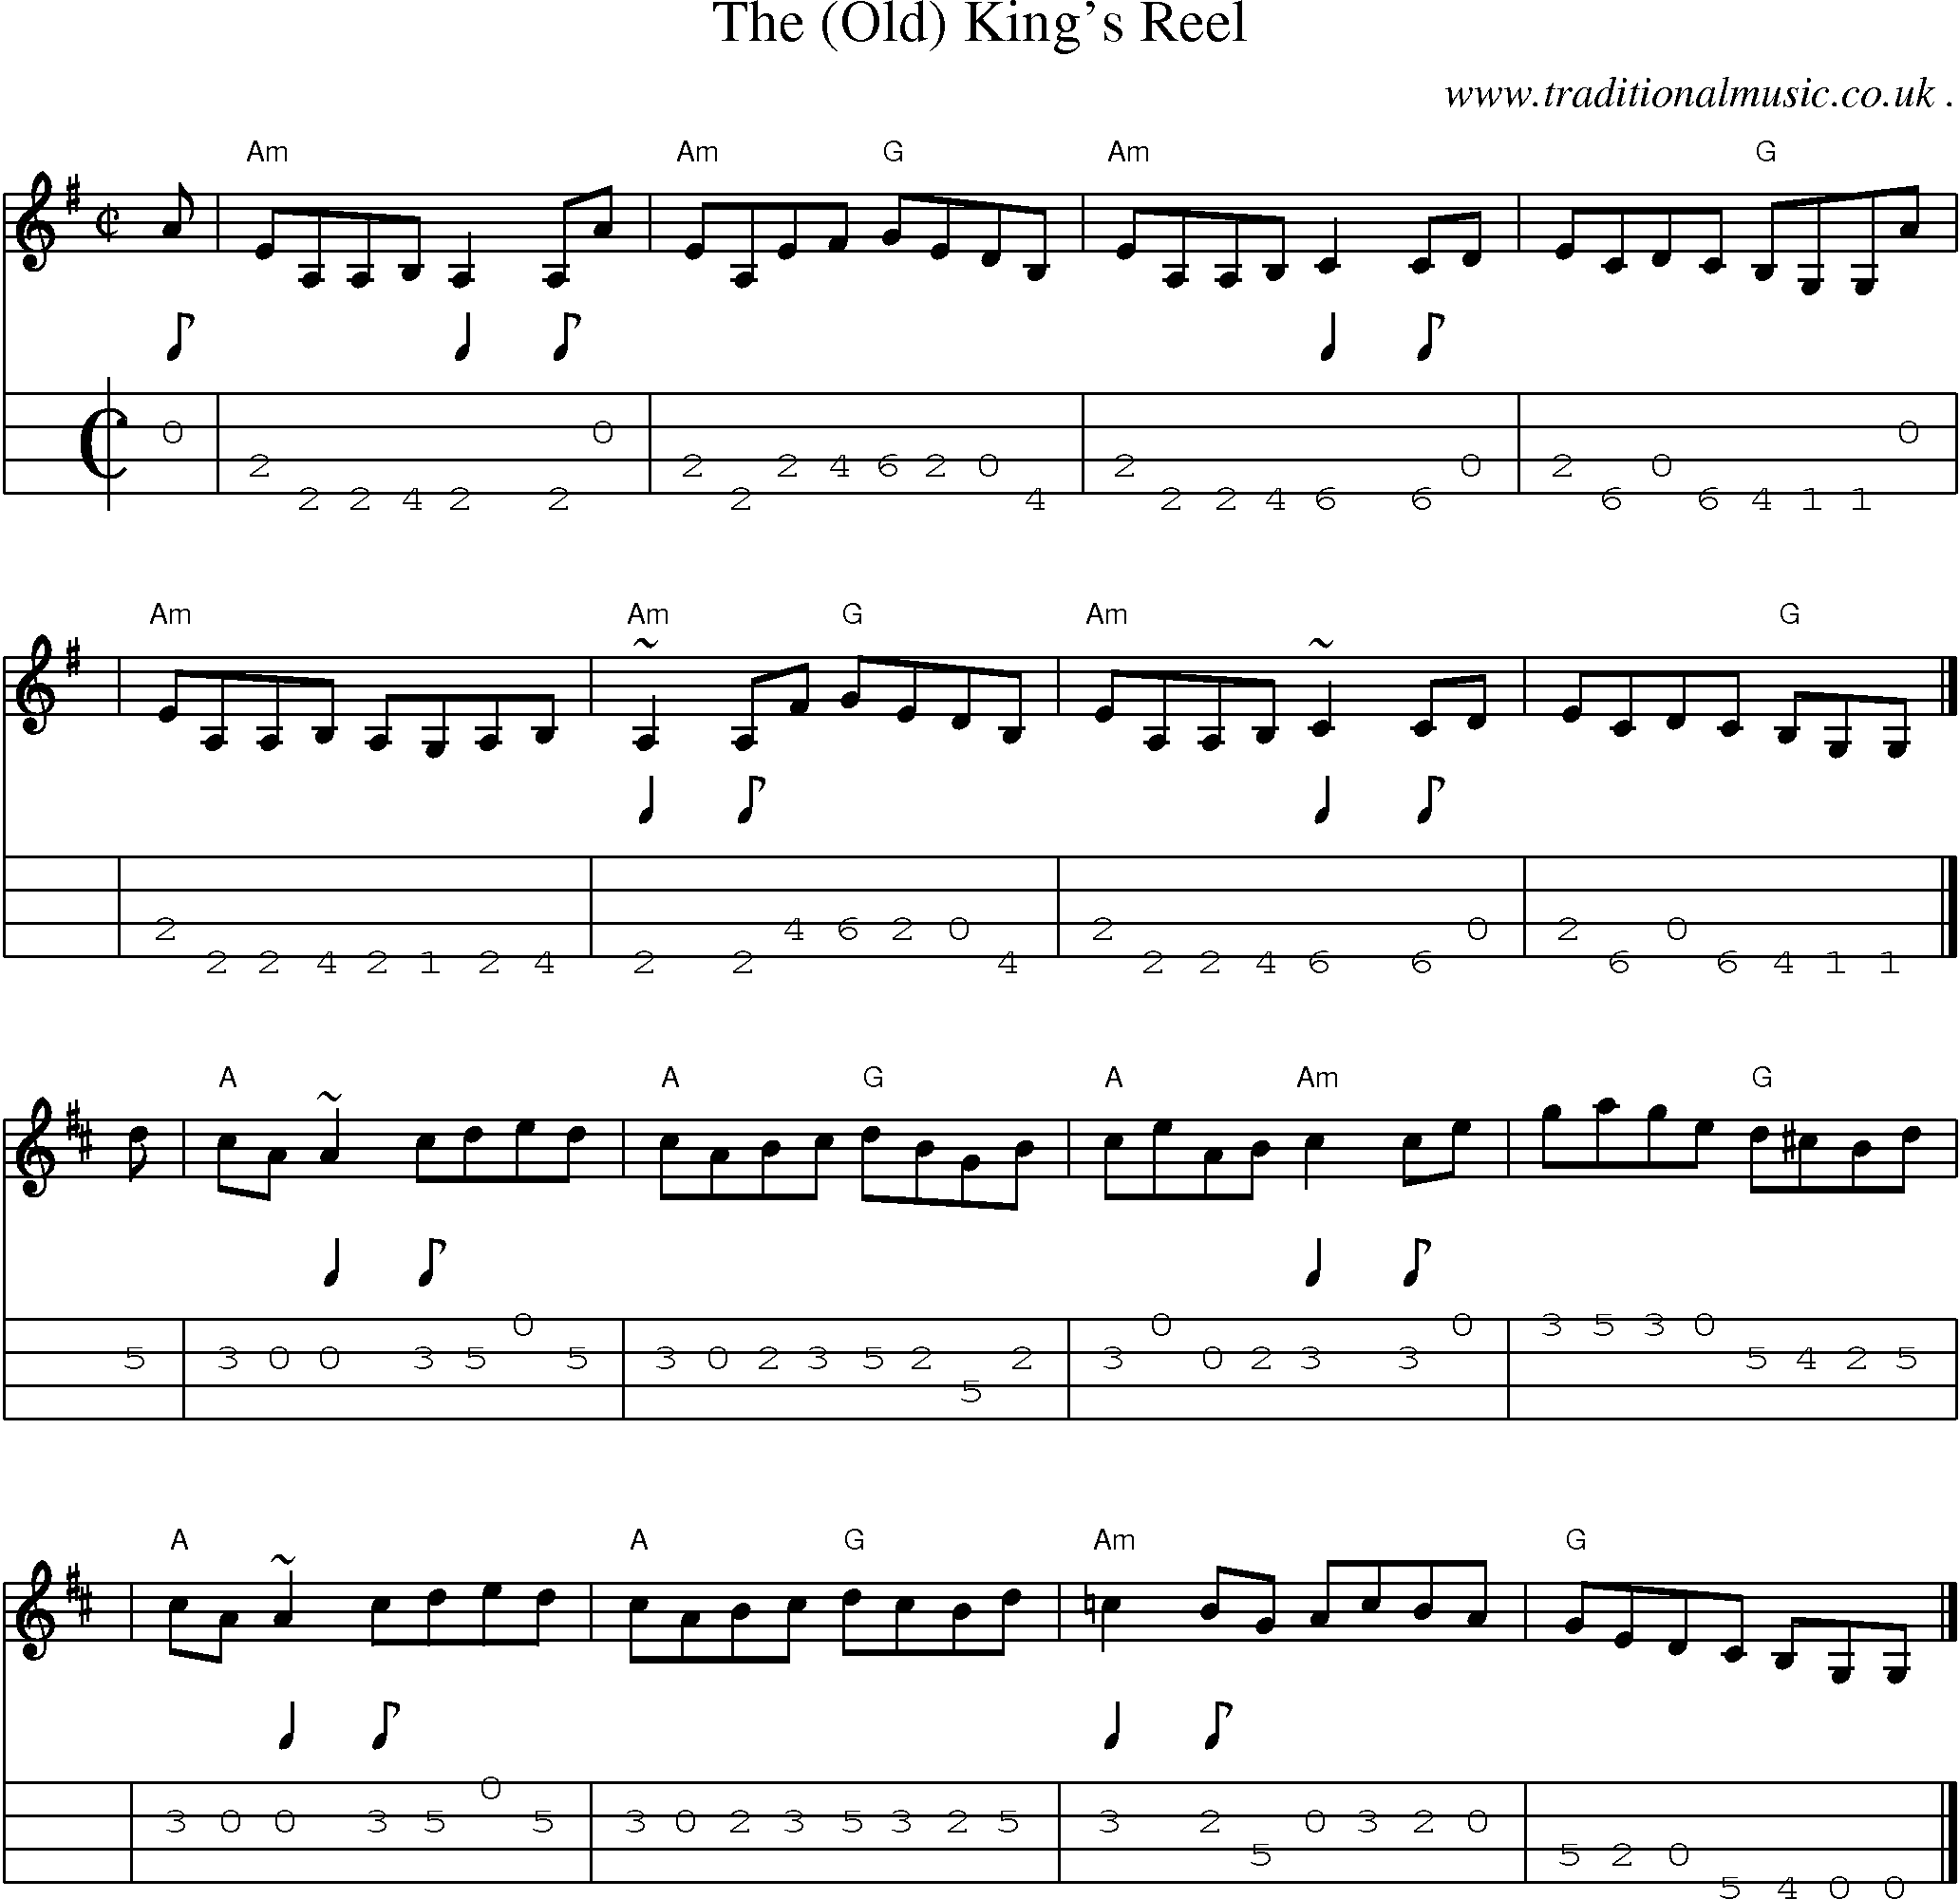 Sheet-music  score, Chords and Mandolin Tabs for The Old Kings Reel